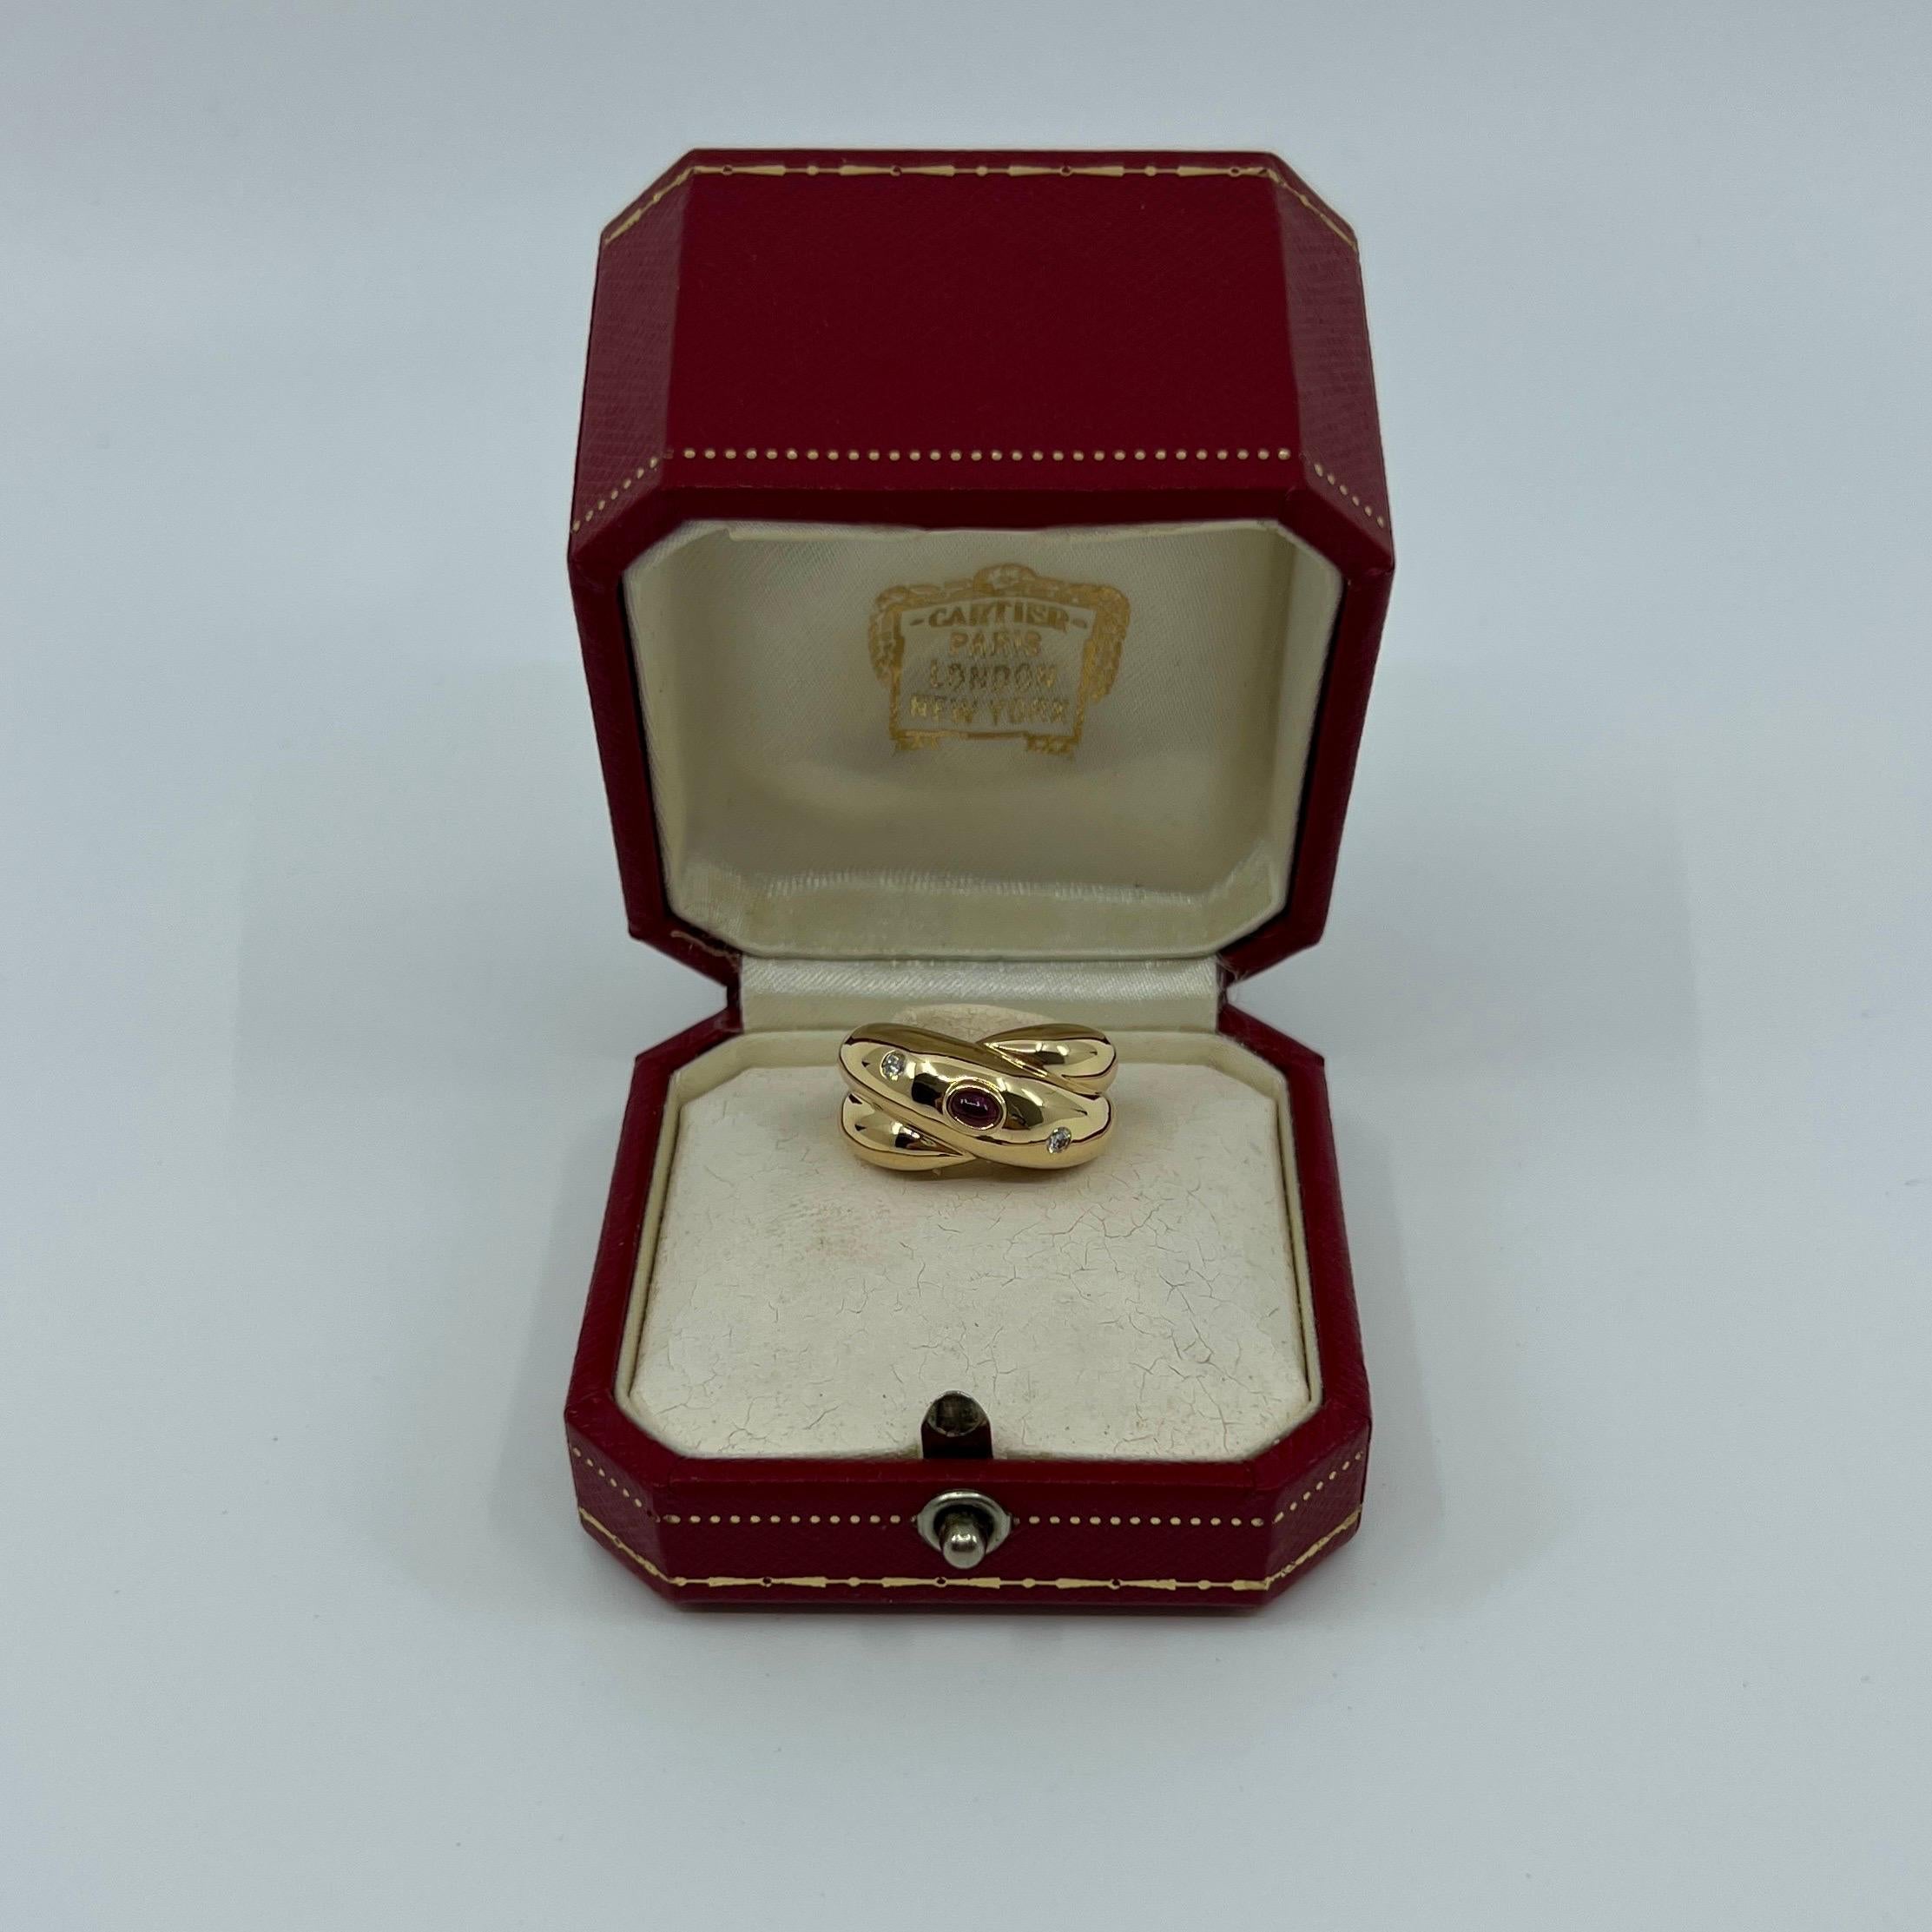 Very Rare Vintage Cartier Ruby & Diamond Corize 18k Yellow Gold Dome Ring

Stunning yellow gold ring set with a fine deep red ruby cabochon and 2 round brilliant cut diamonds. 
Fine jewellery houses like Cartier only use the finest of gemstones in